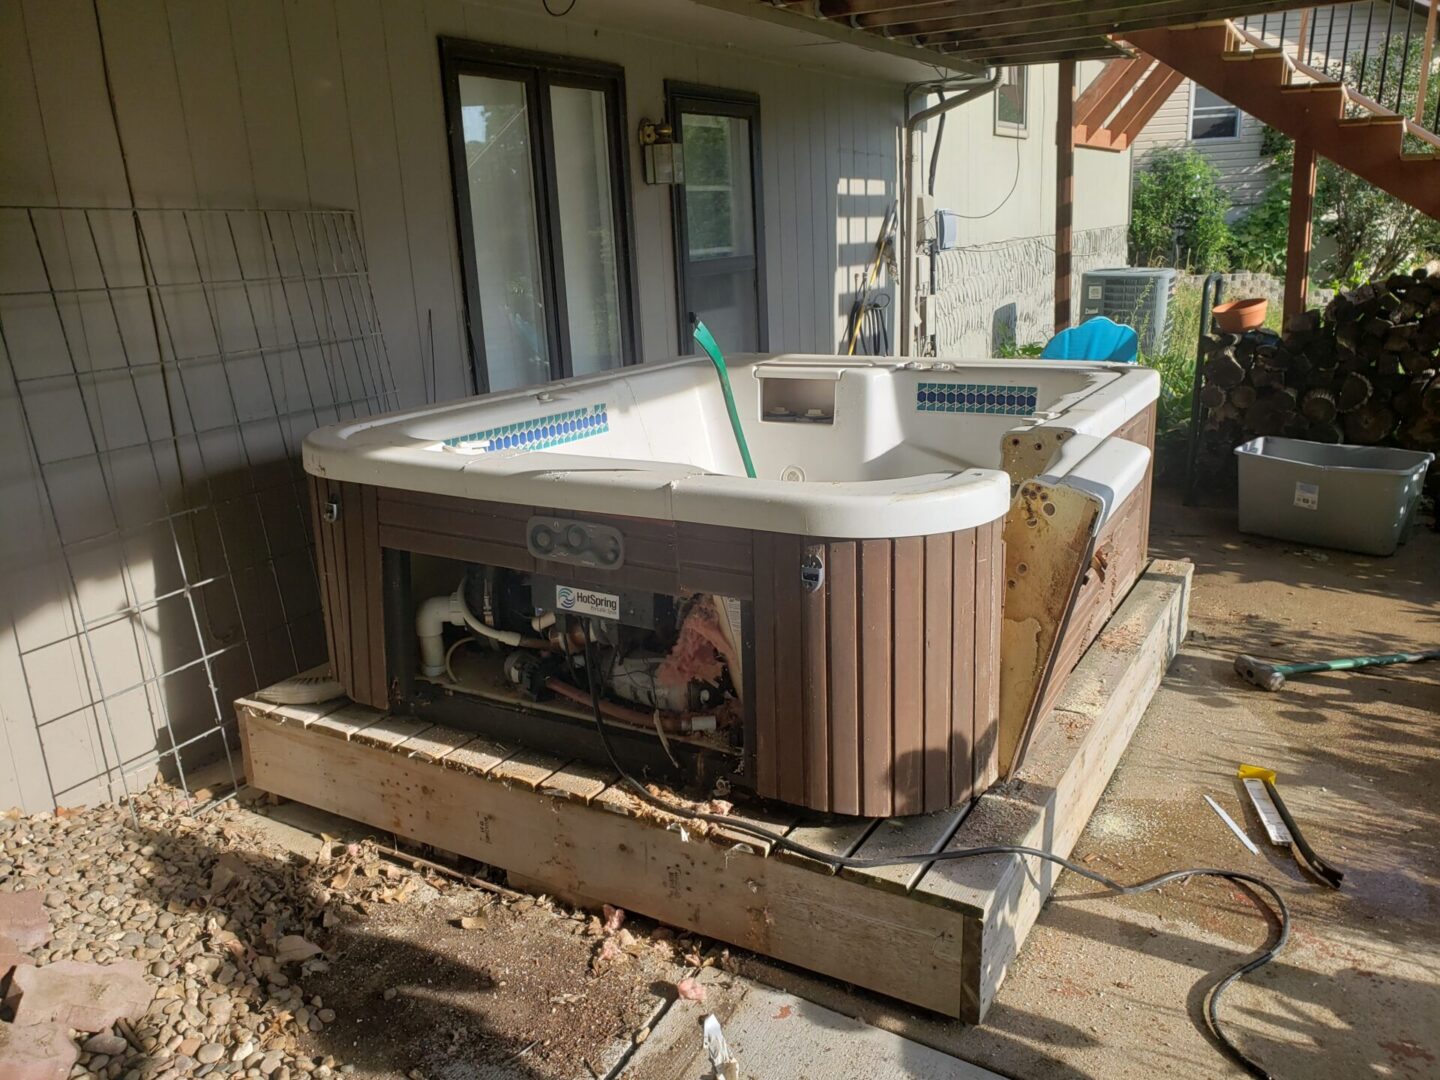 A hot tub is being built in the back yard.